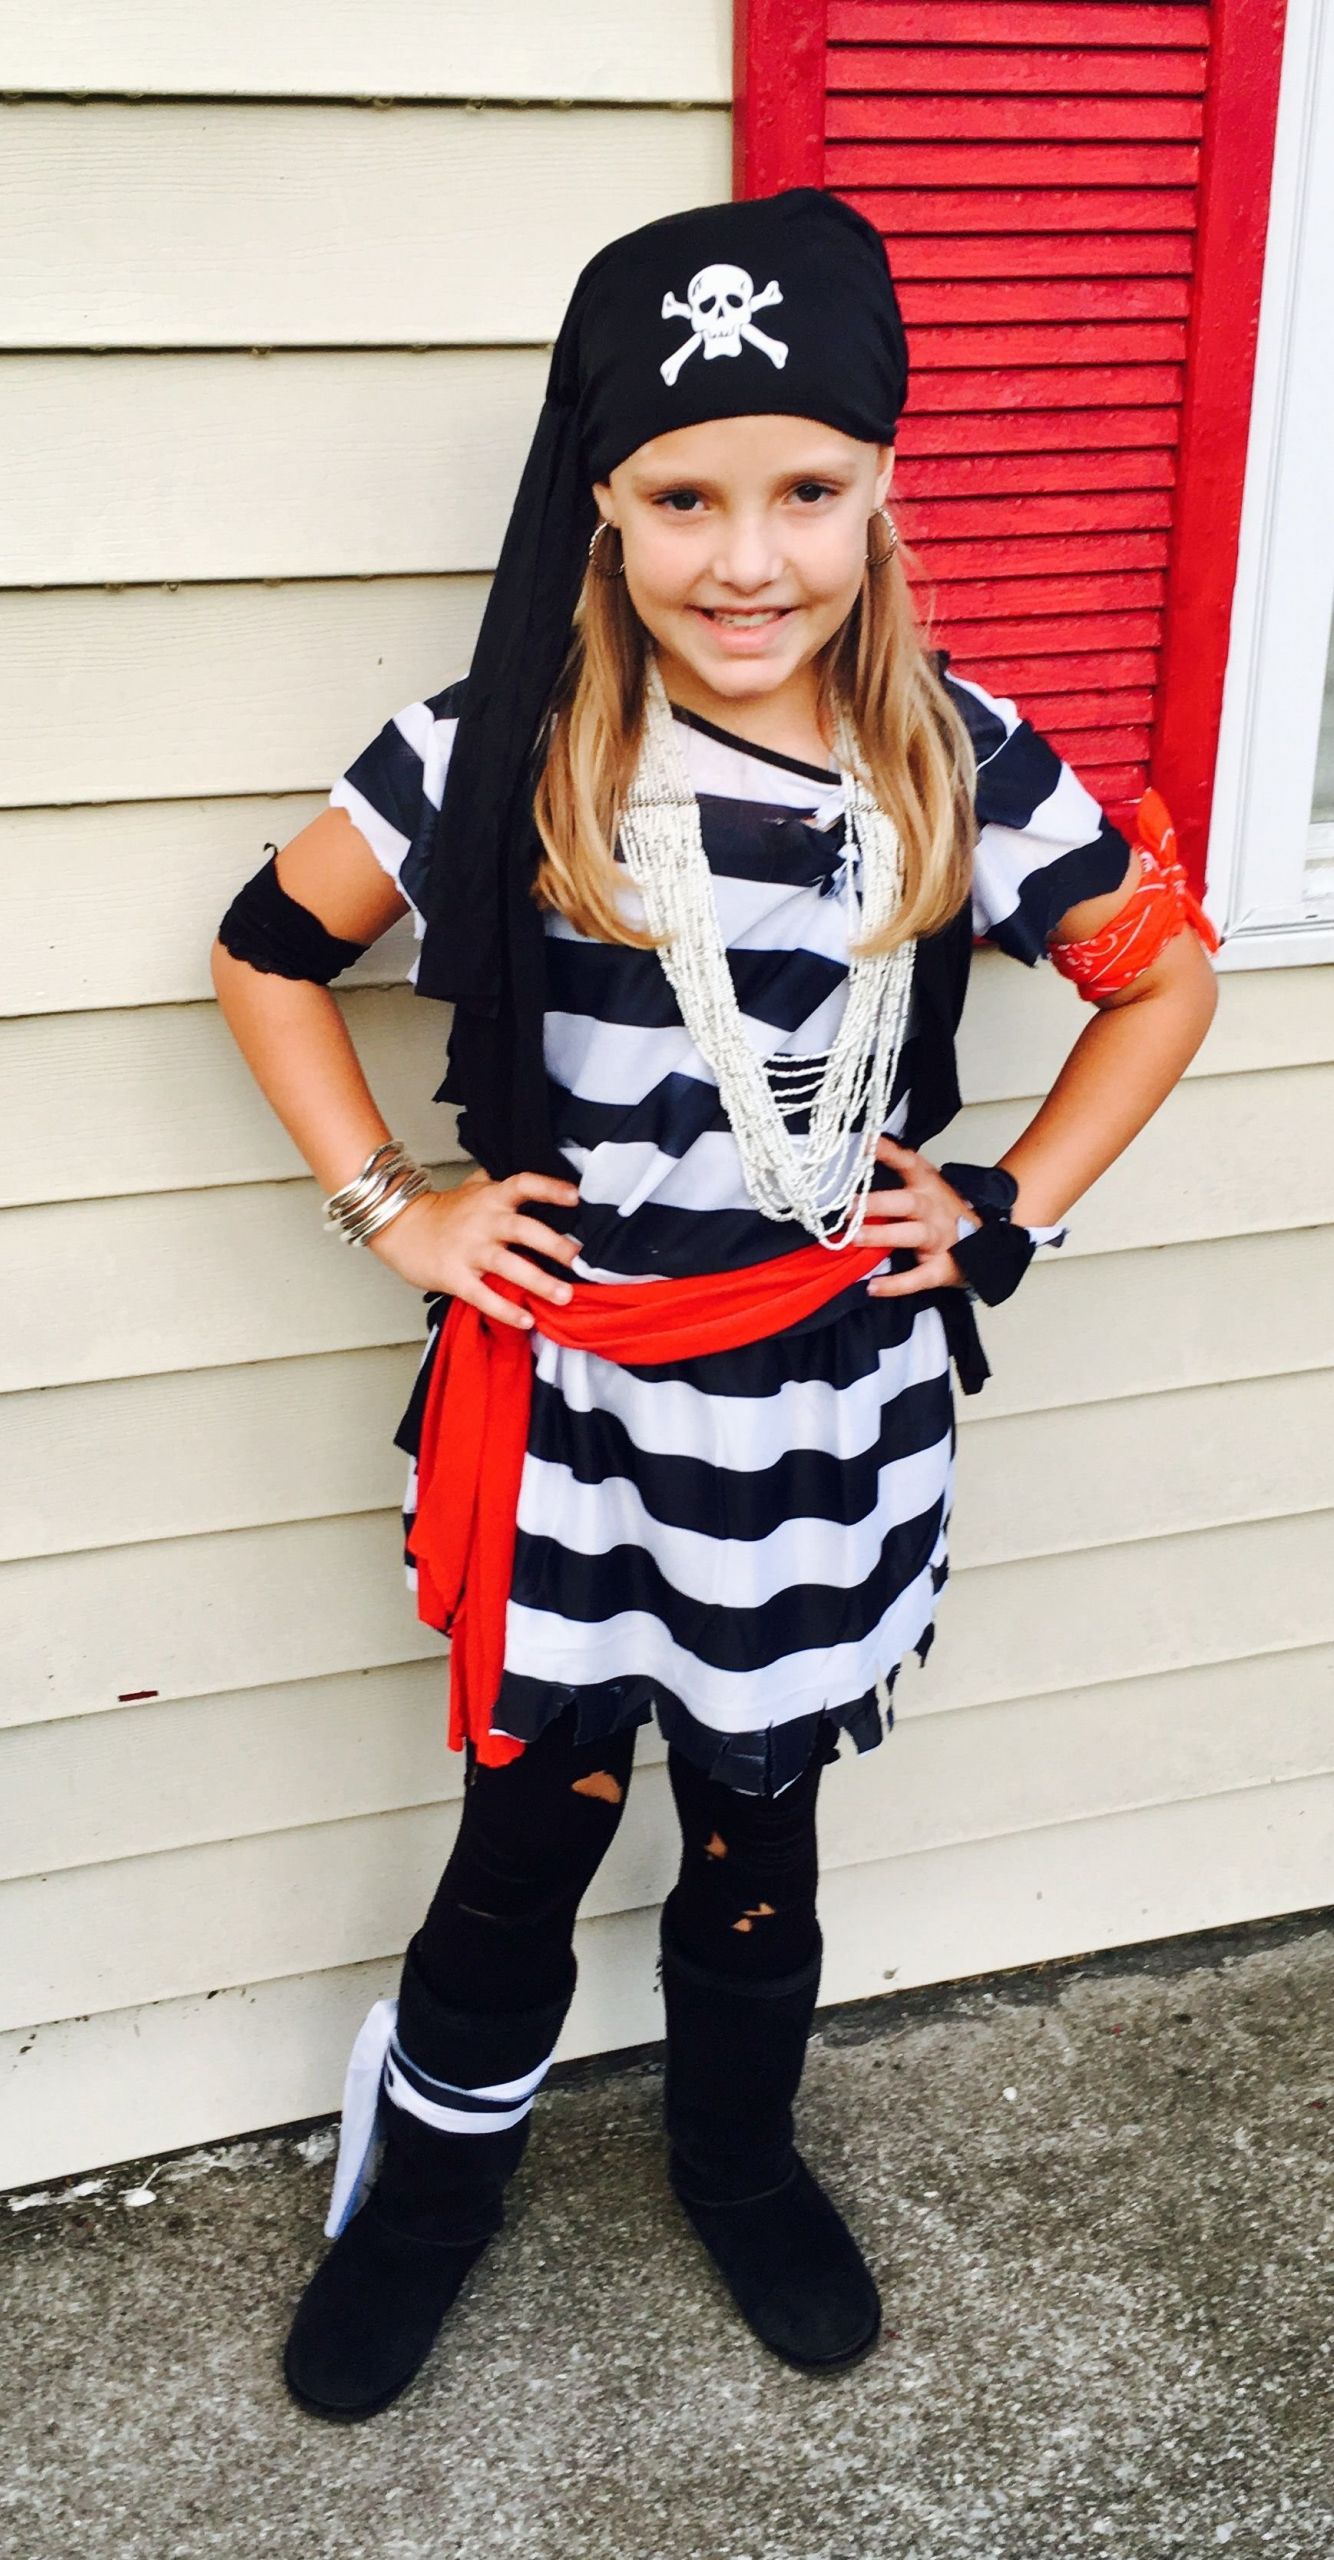 DIY Pirate Costume For Adults
 10 Attractive Homemade Pirate Costume Ideas For Kids 2019